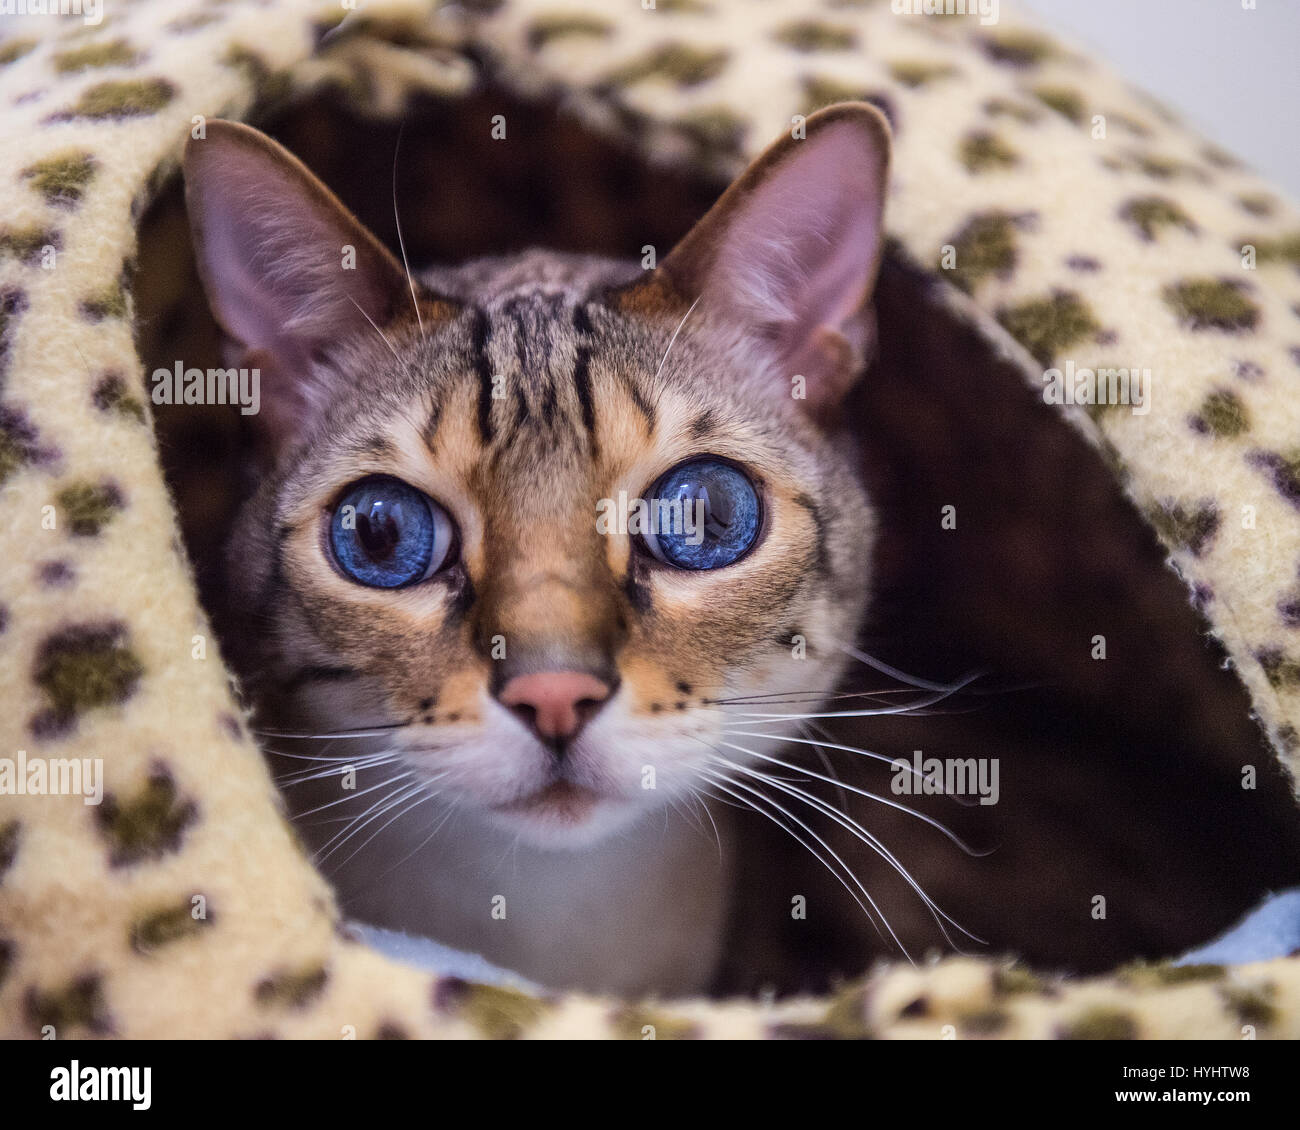 bengal cat with blue eyes in bed Stock Photo